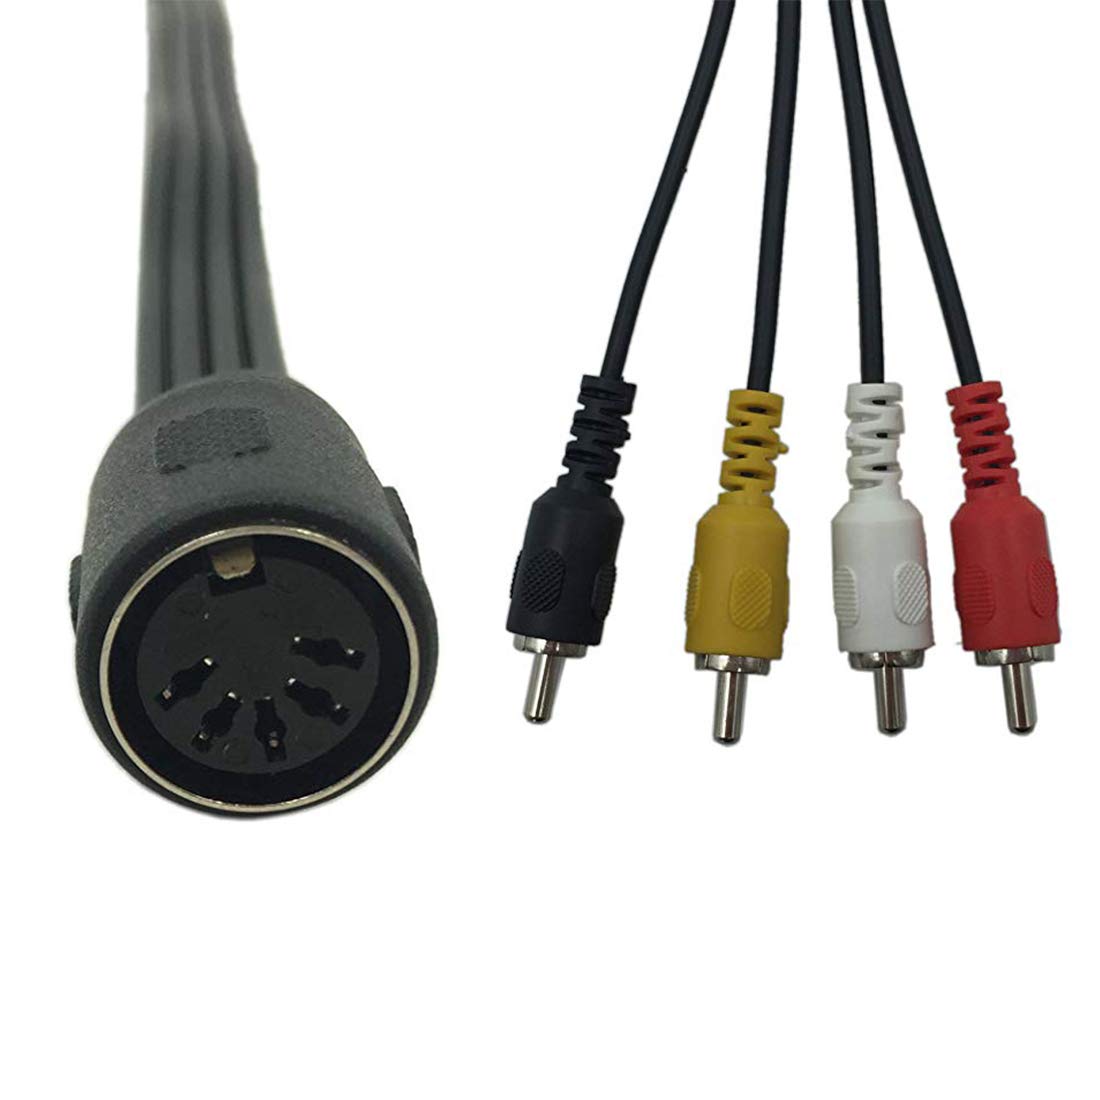 5 Pin Din Female to 4 RCA Male Professional Grade Audio Cable for Bang & Olufsen, Naim, Quad.Stereo Systems (0.3m/1ft)